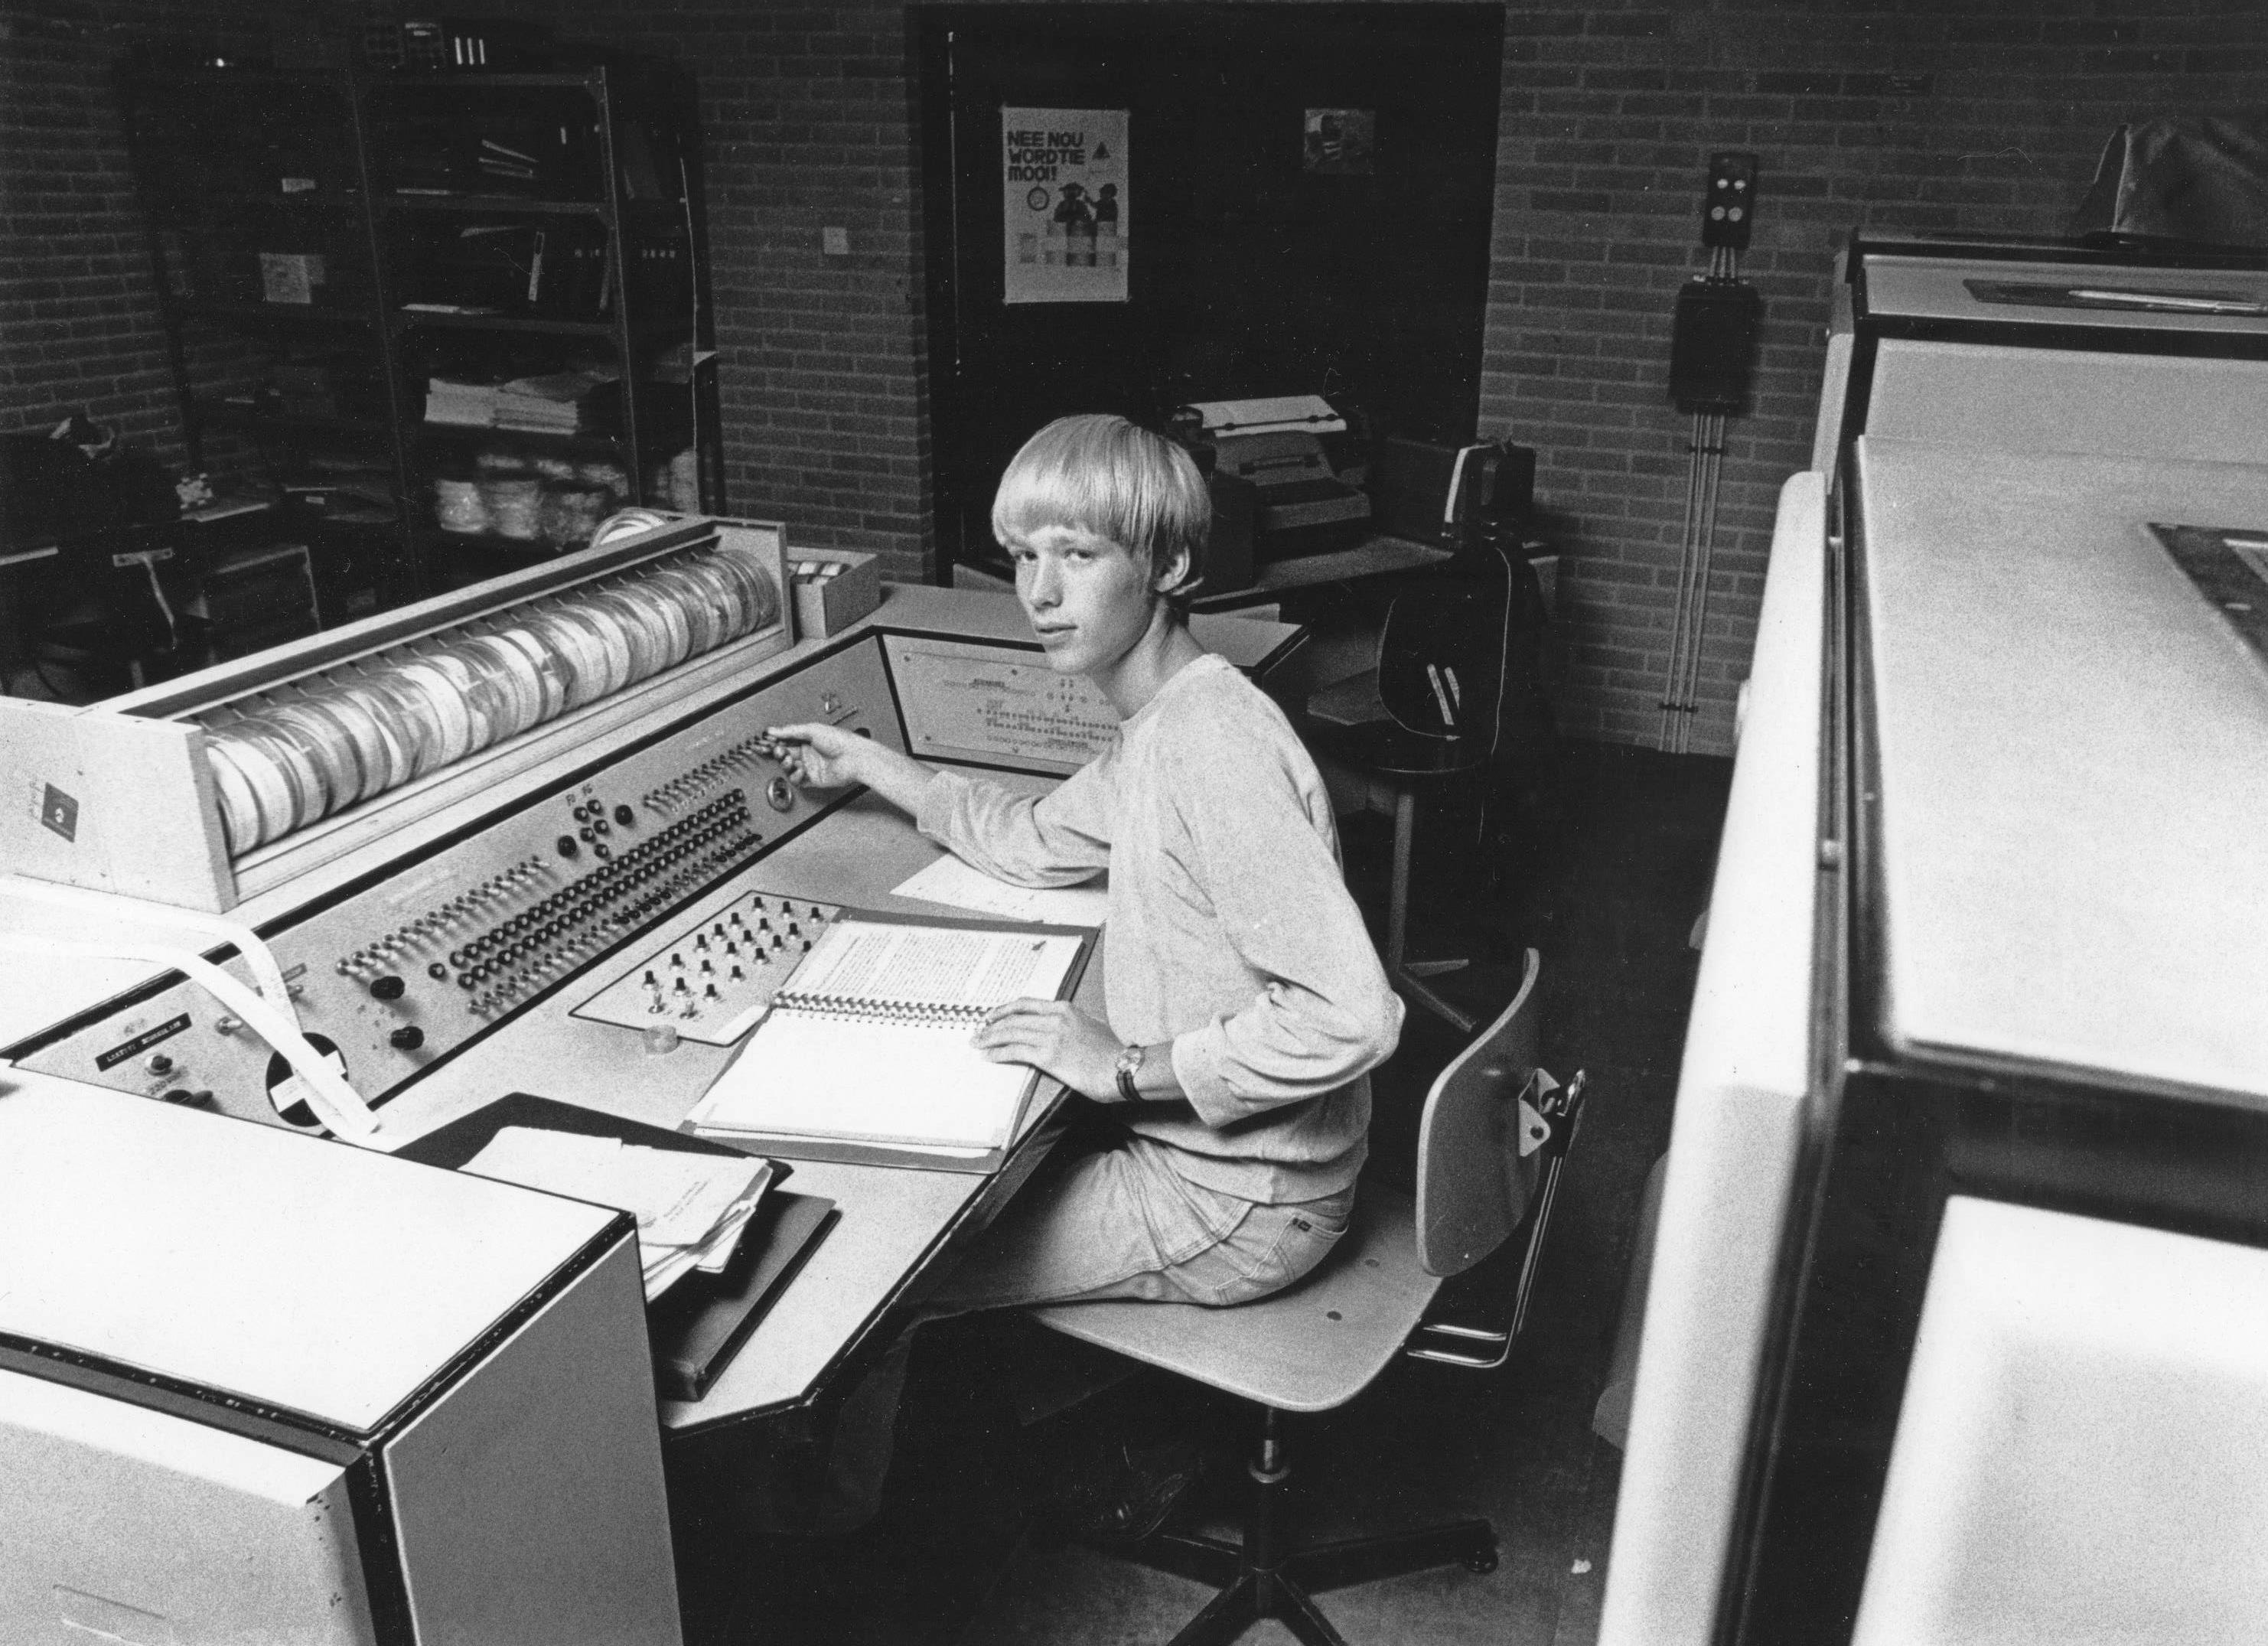 Me in October 1979 behind an old X1 from Electrologica, the first commercial computer in the Netherlands. It shows my early interest for computers.